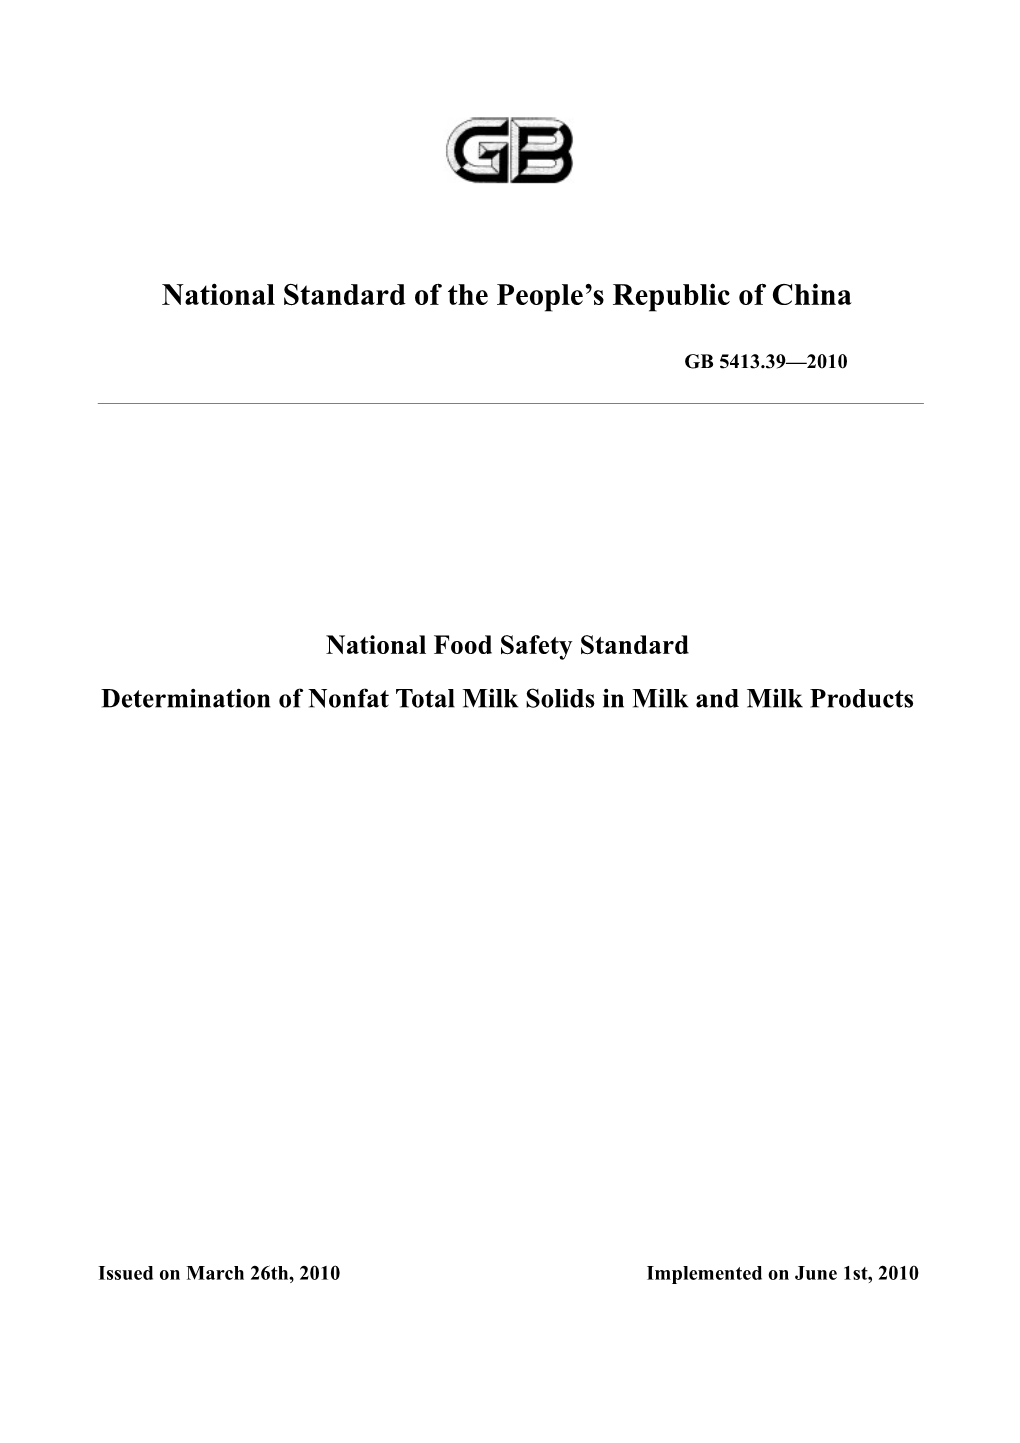 Determination of Nonfat Total Milk Solids in Milk and Milk Products